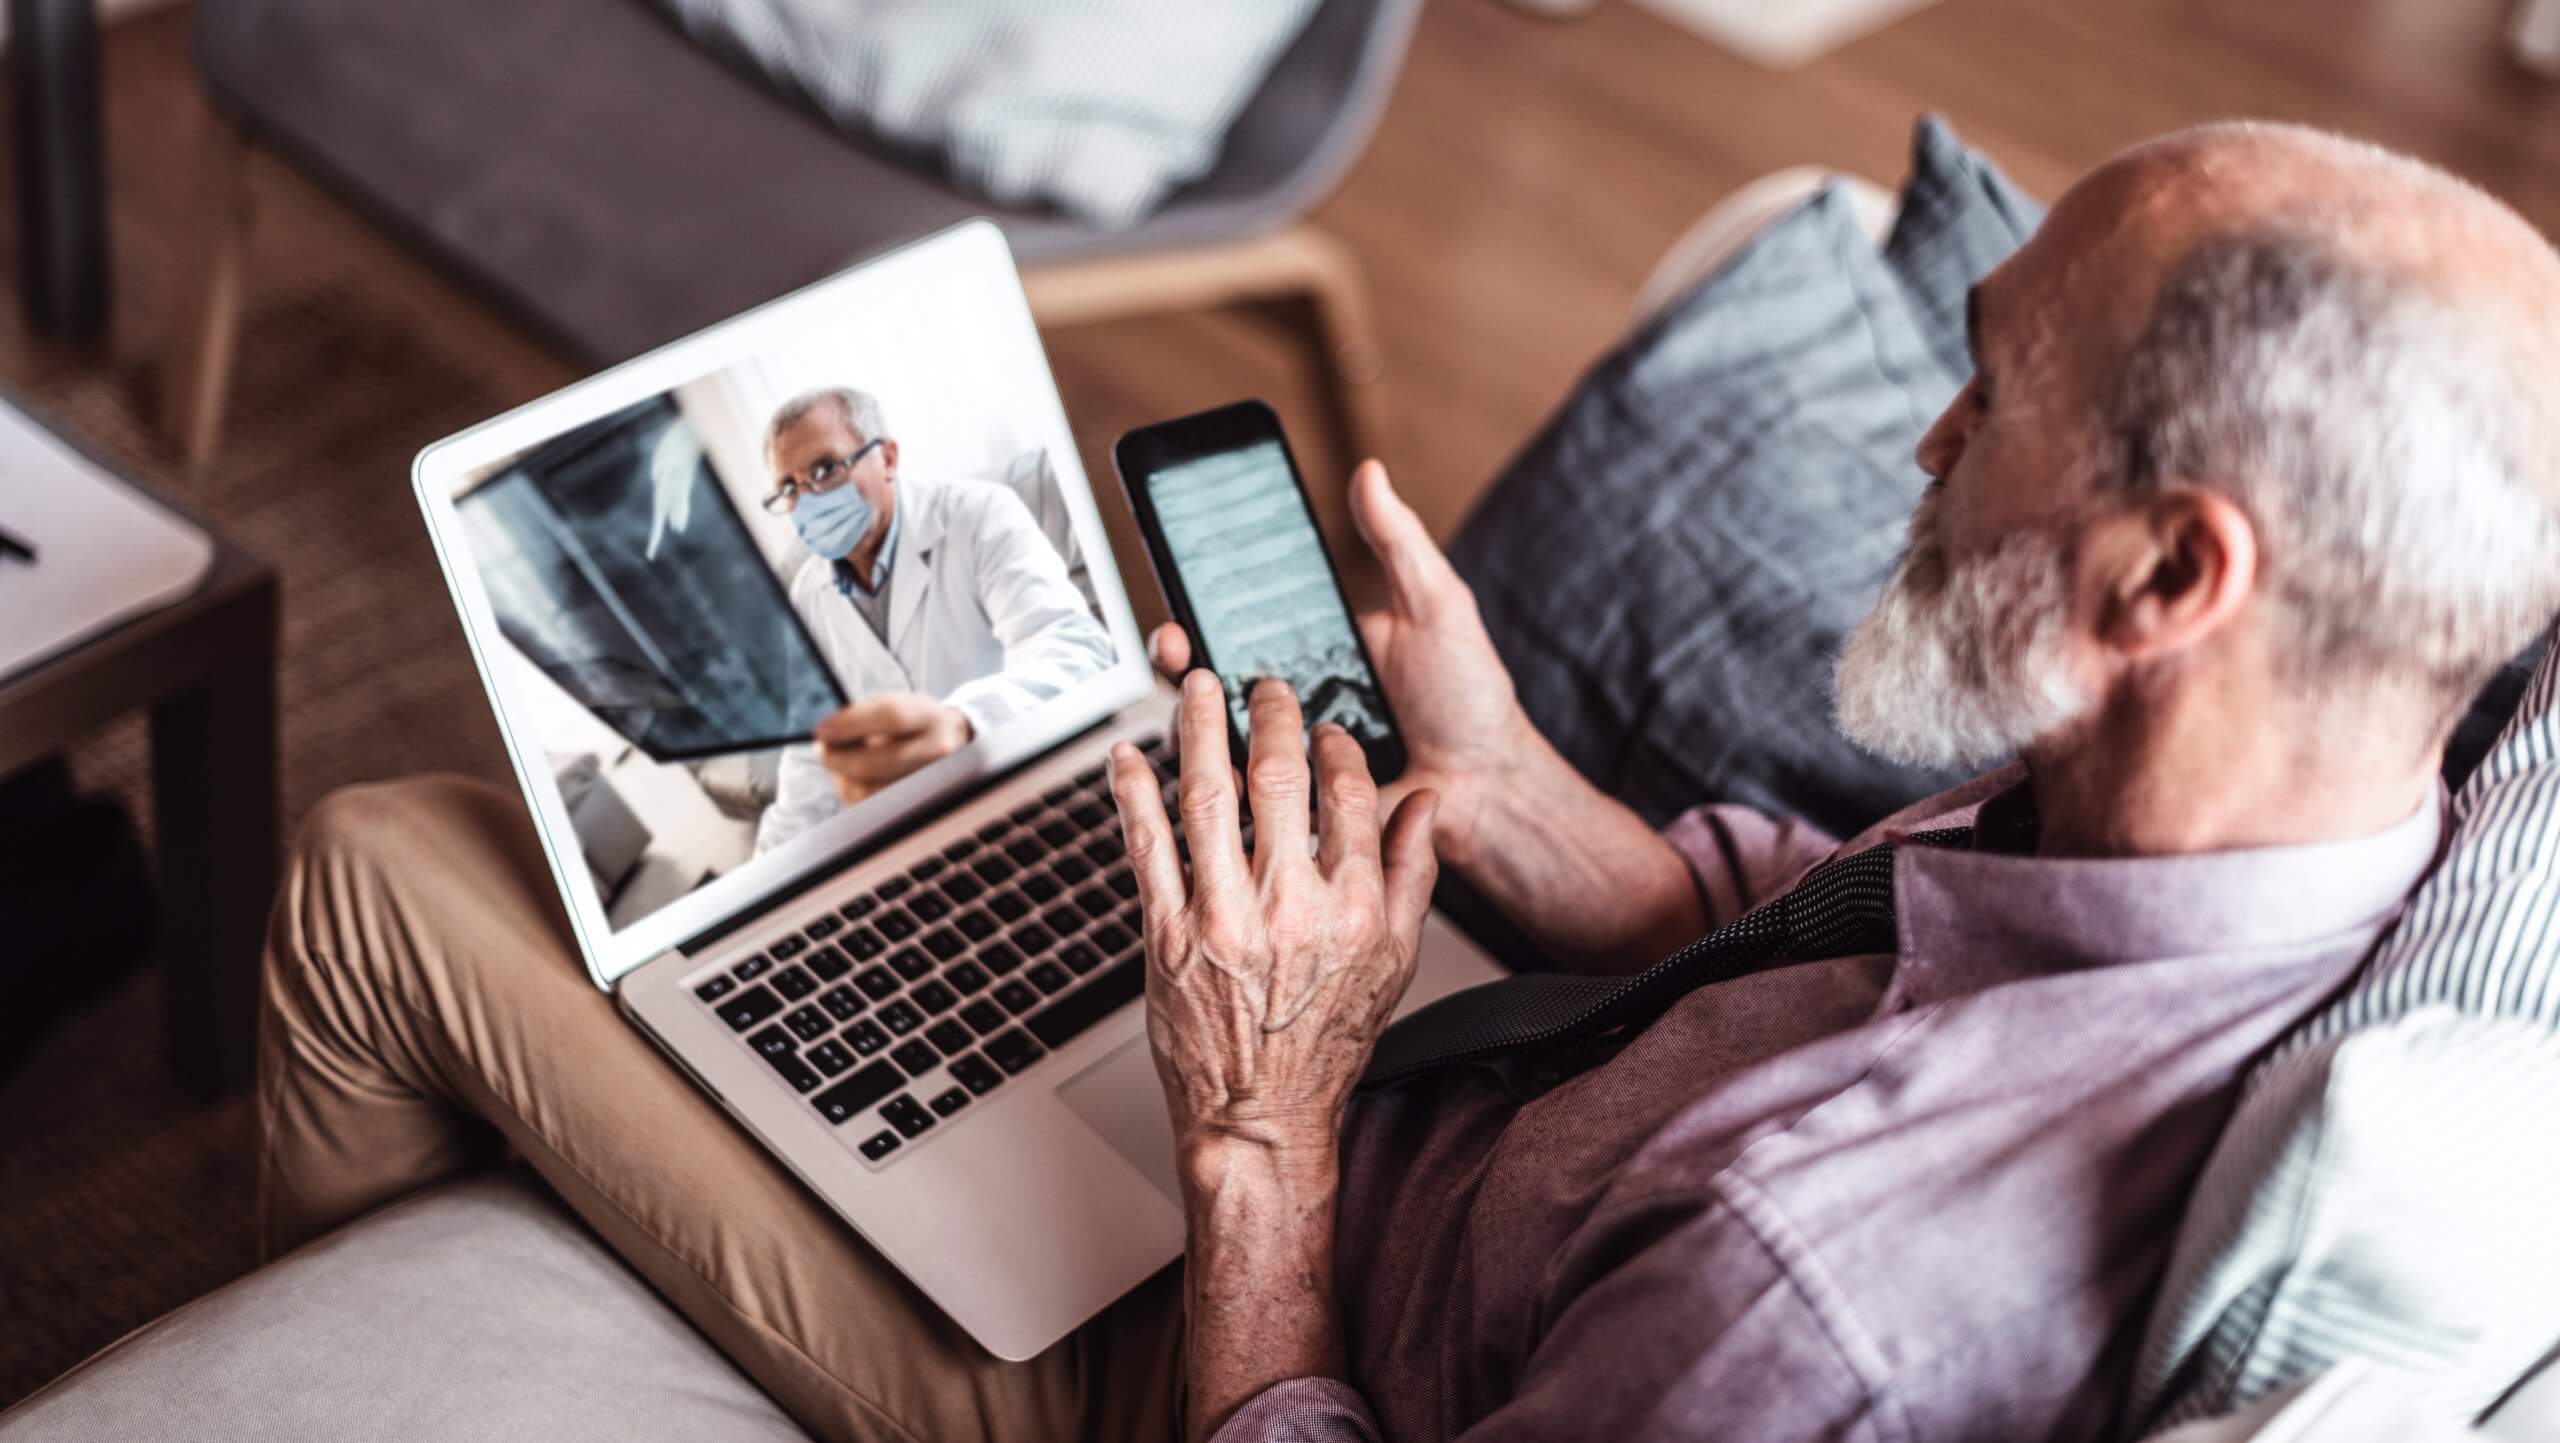 Elderly man looking at a computer screen. He is having a medical diagnosis via video.